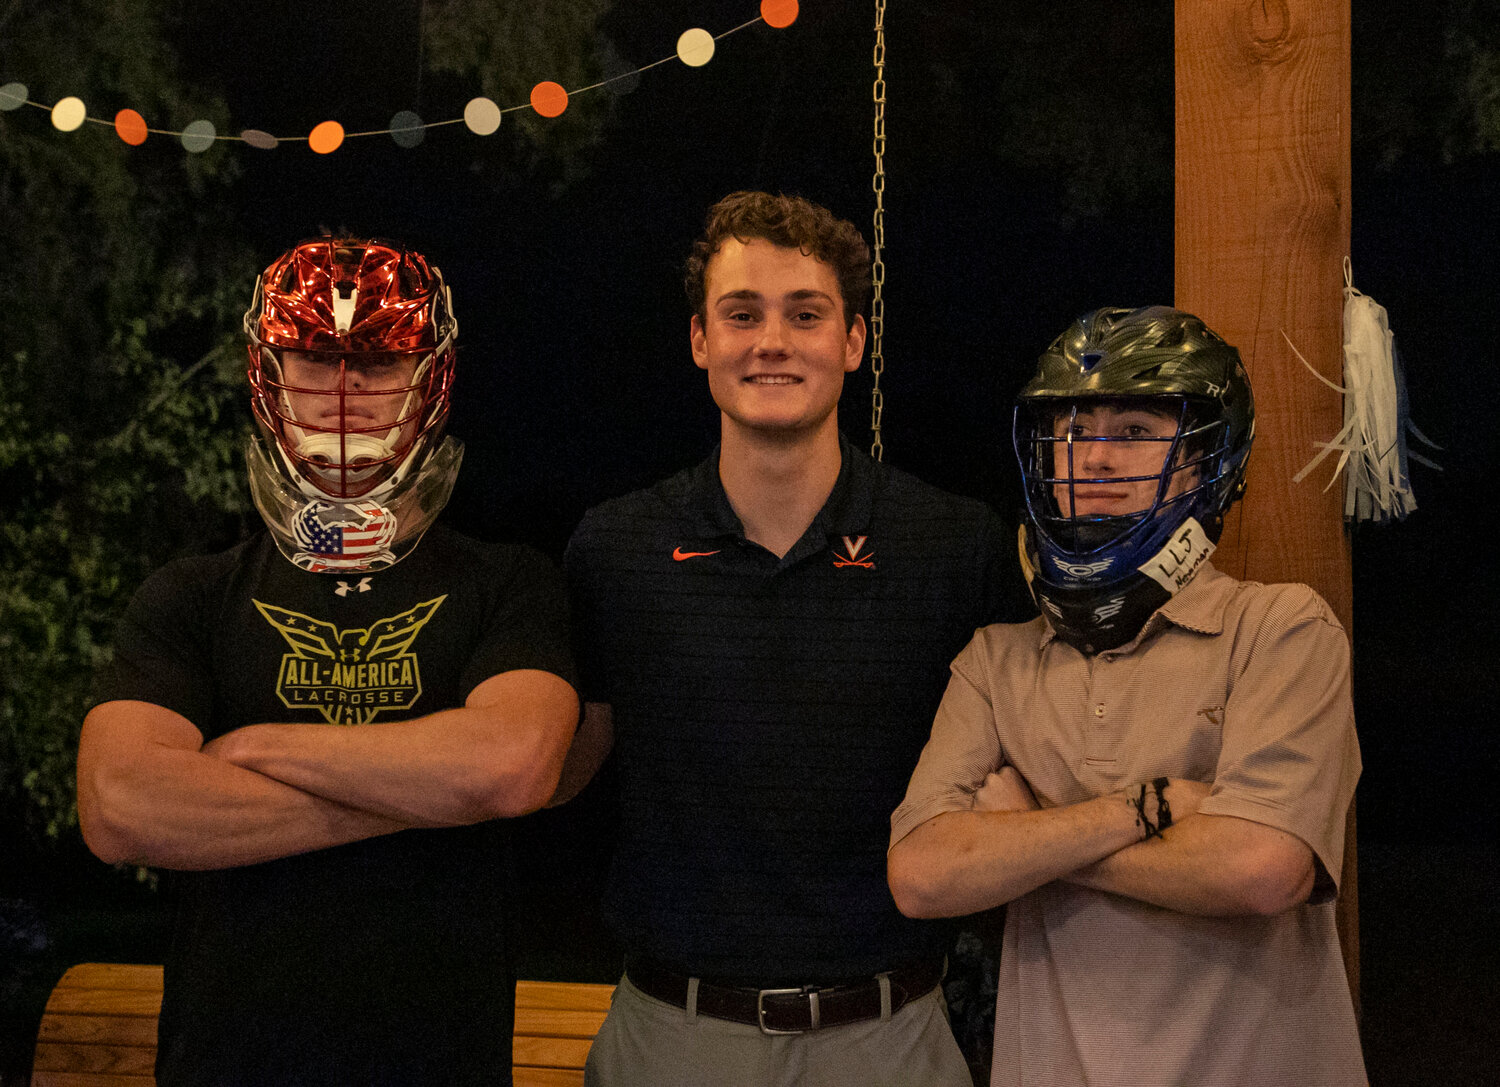 Fairhope seniors Brockton Norris and Lane Watson celebrated the signing of Daphne senior Troy Capstraw Wednesday night after the All-American goalie penned his National Letter of Intent to join the Virginia Cavaliers.